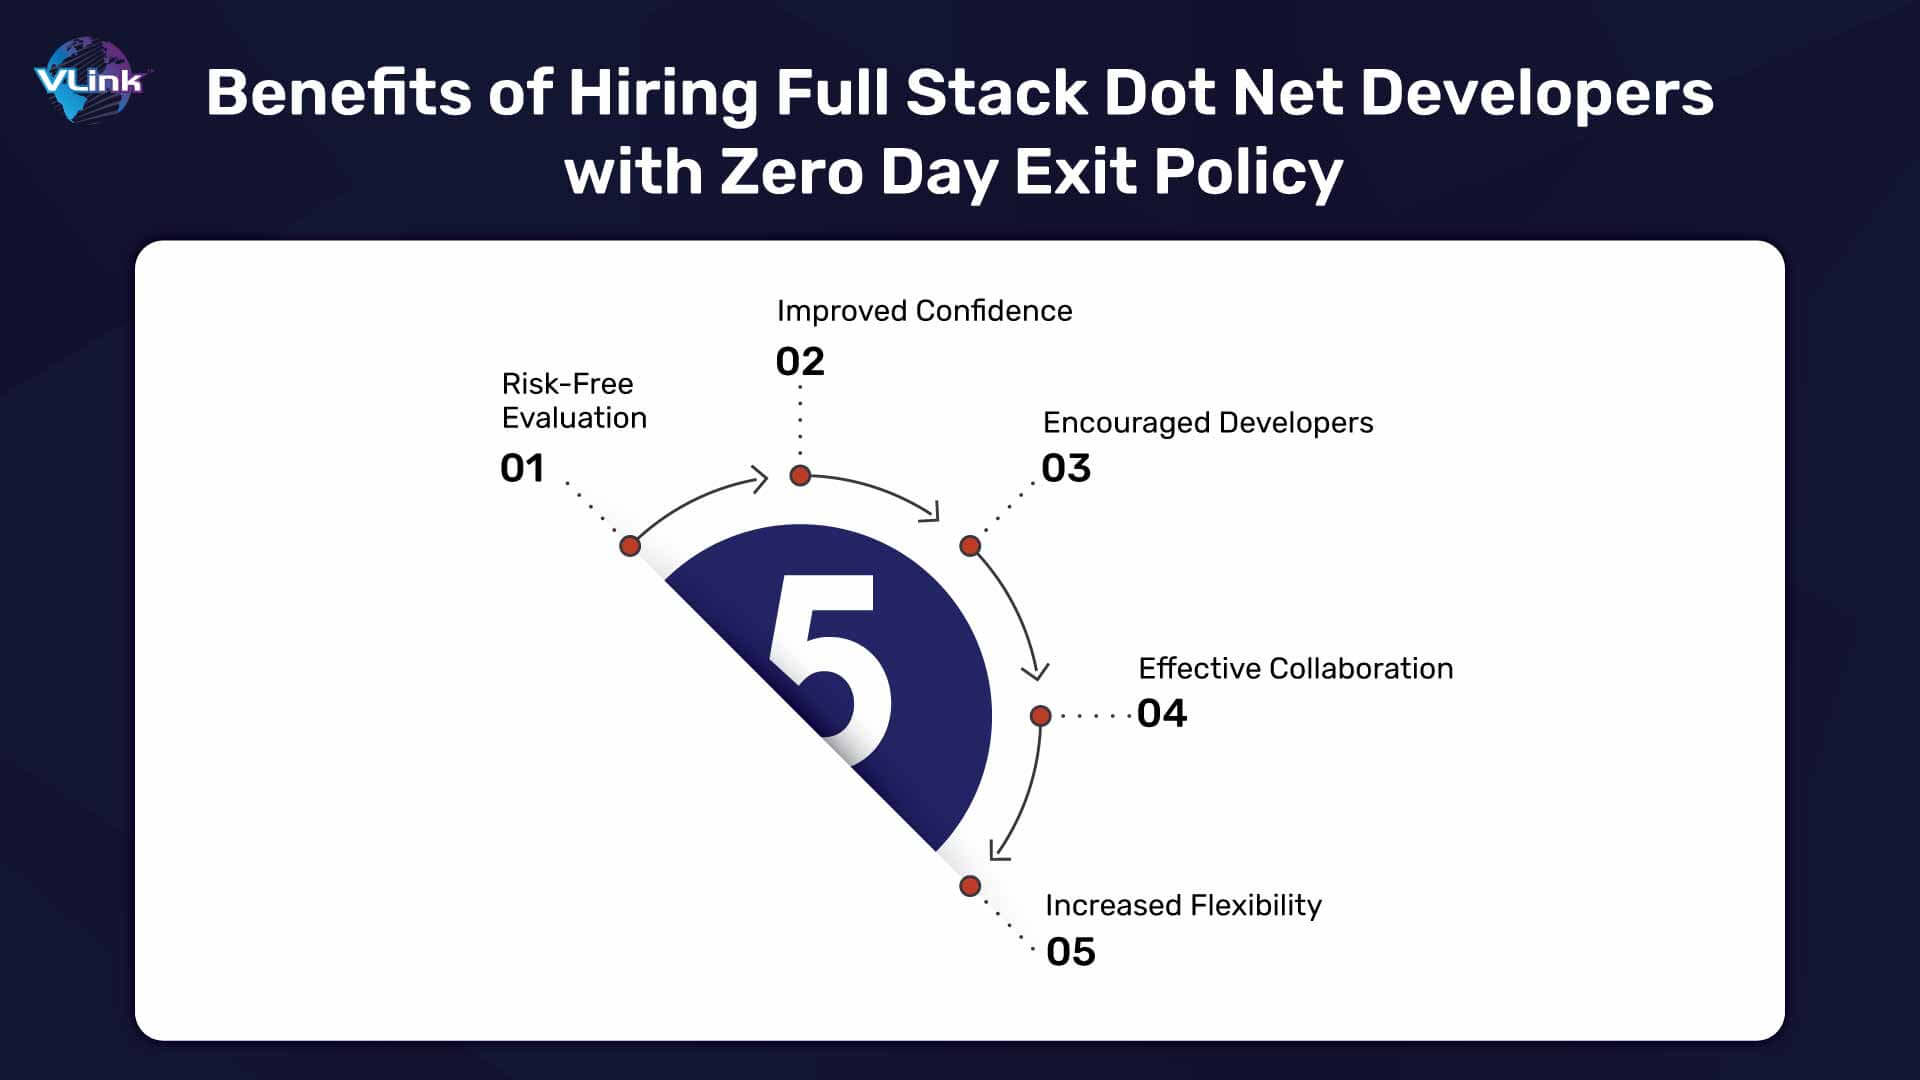 Benefits of Hiring Full Stack Dot Net Developers with Zero Day Exit Policy